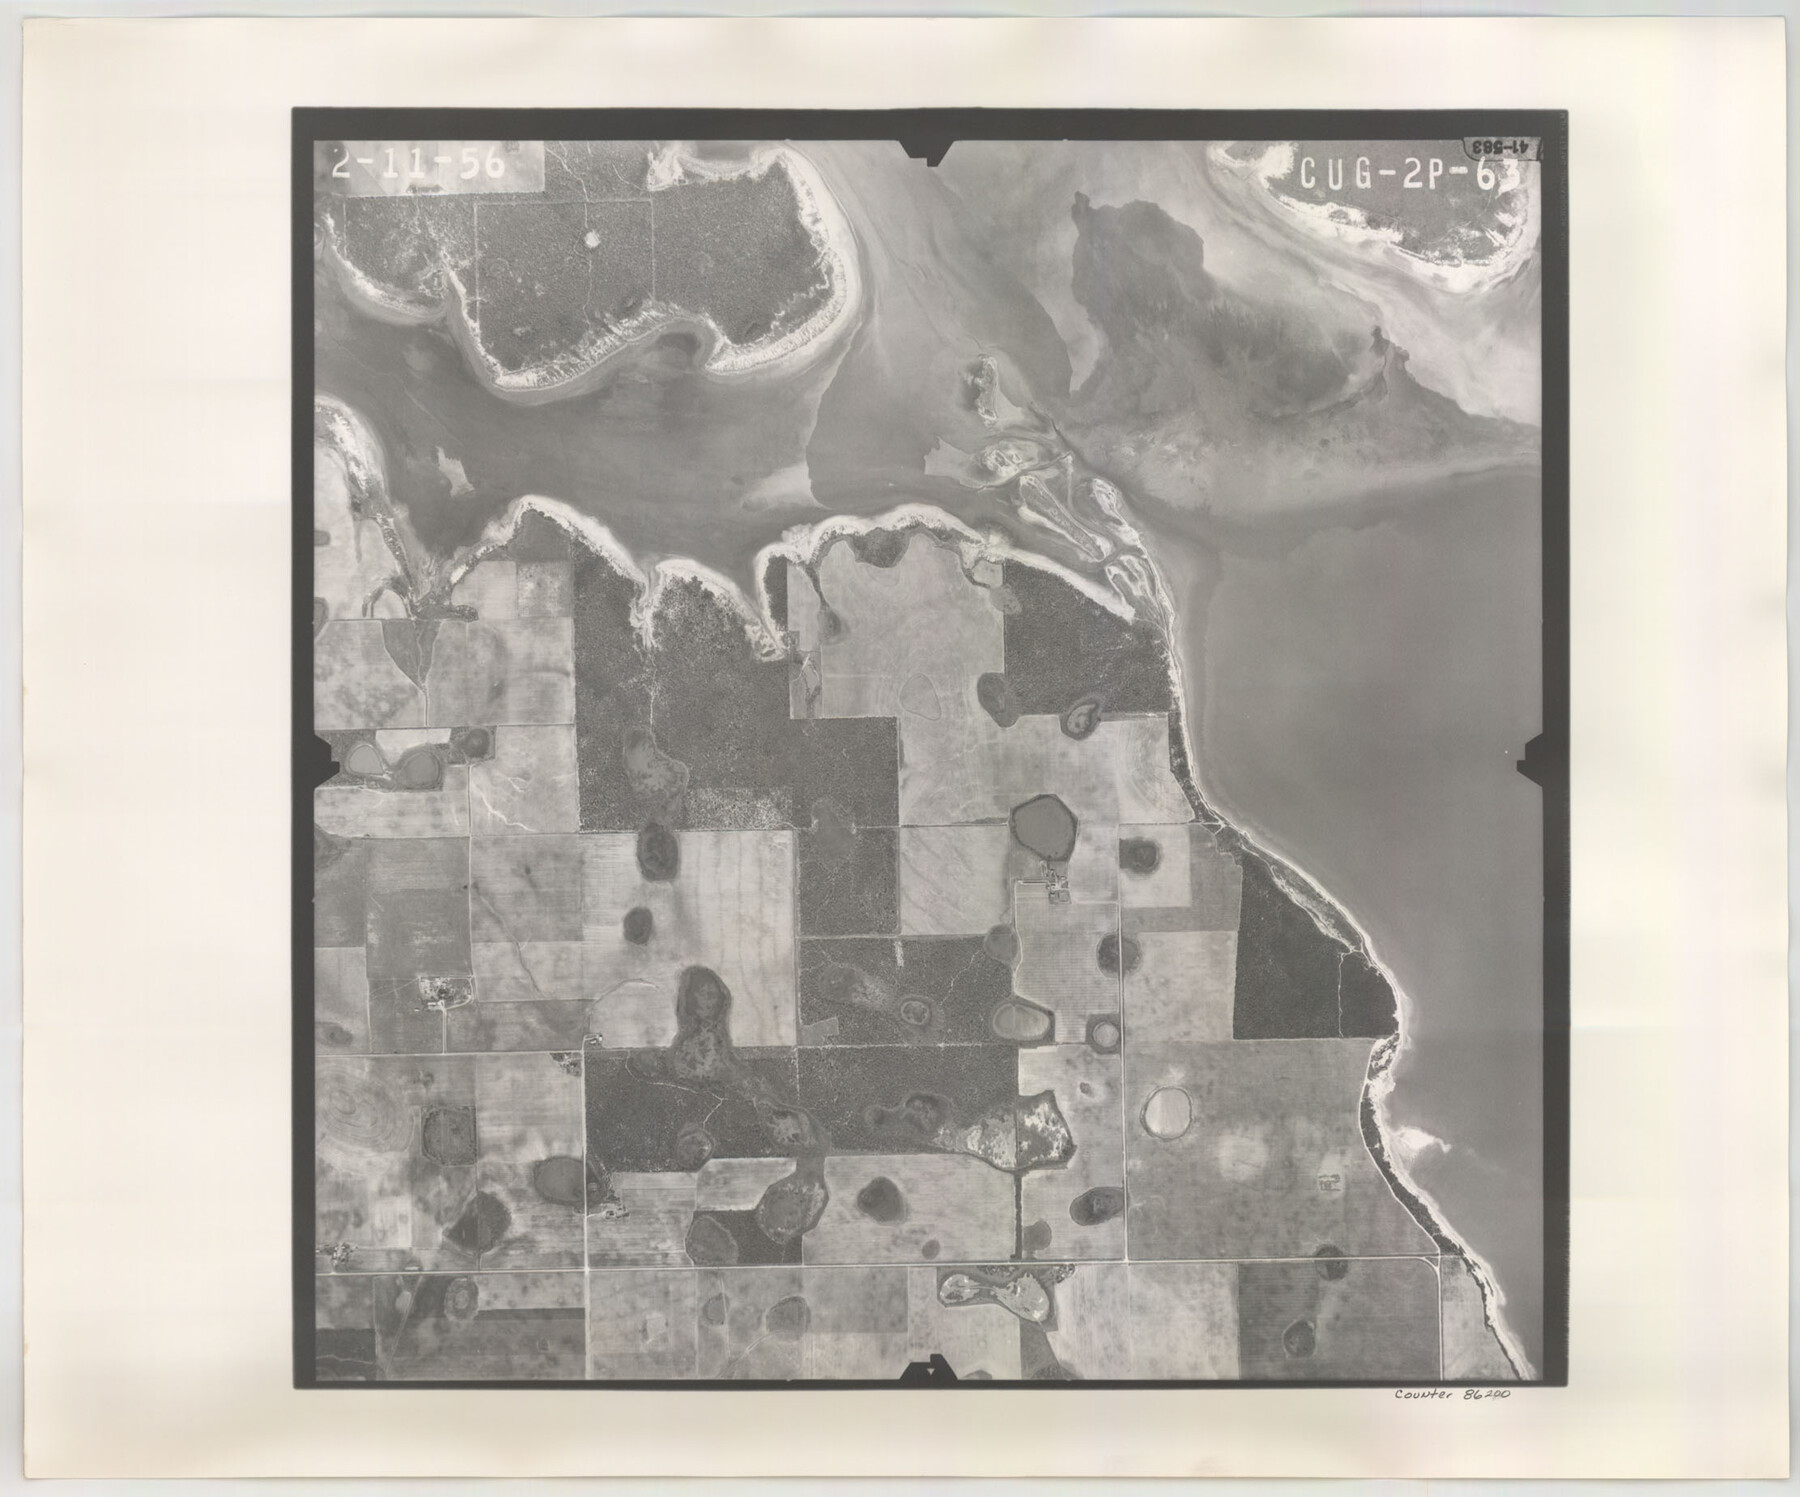 86200, Flight Mission No. CUG-2P, Frame 63, Kleberg County, General Map Collection